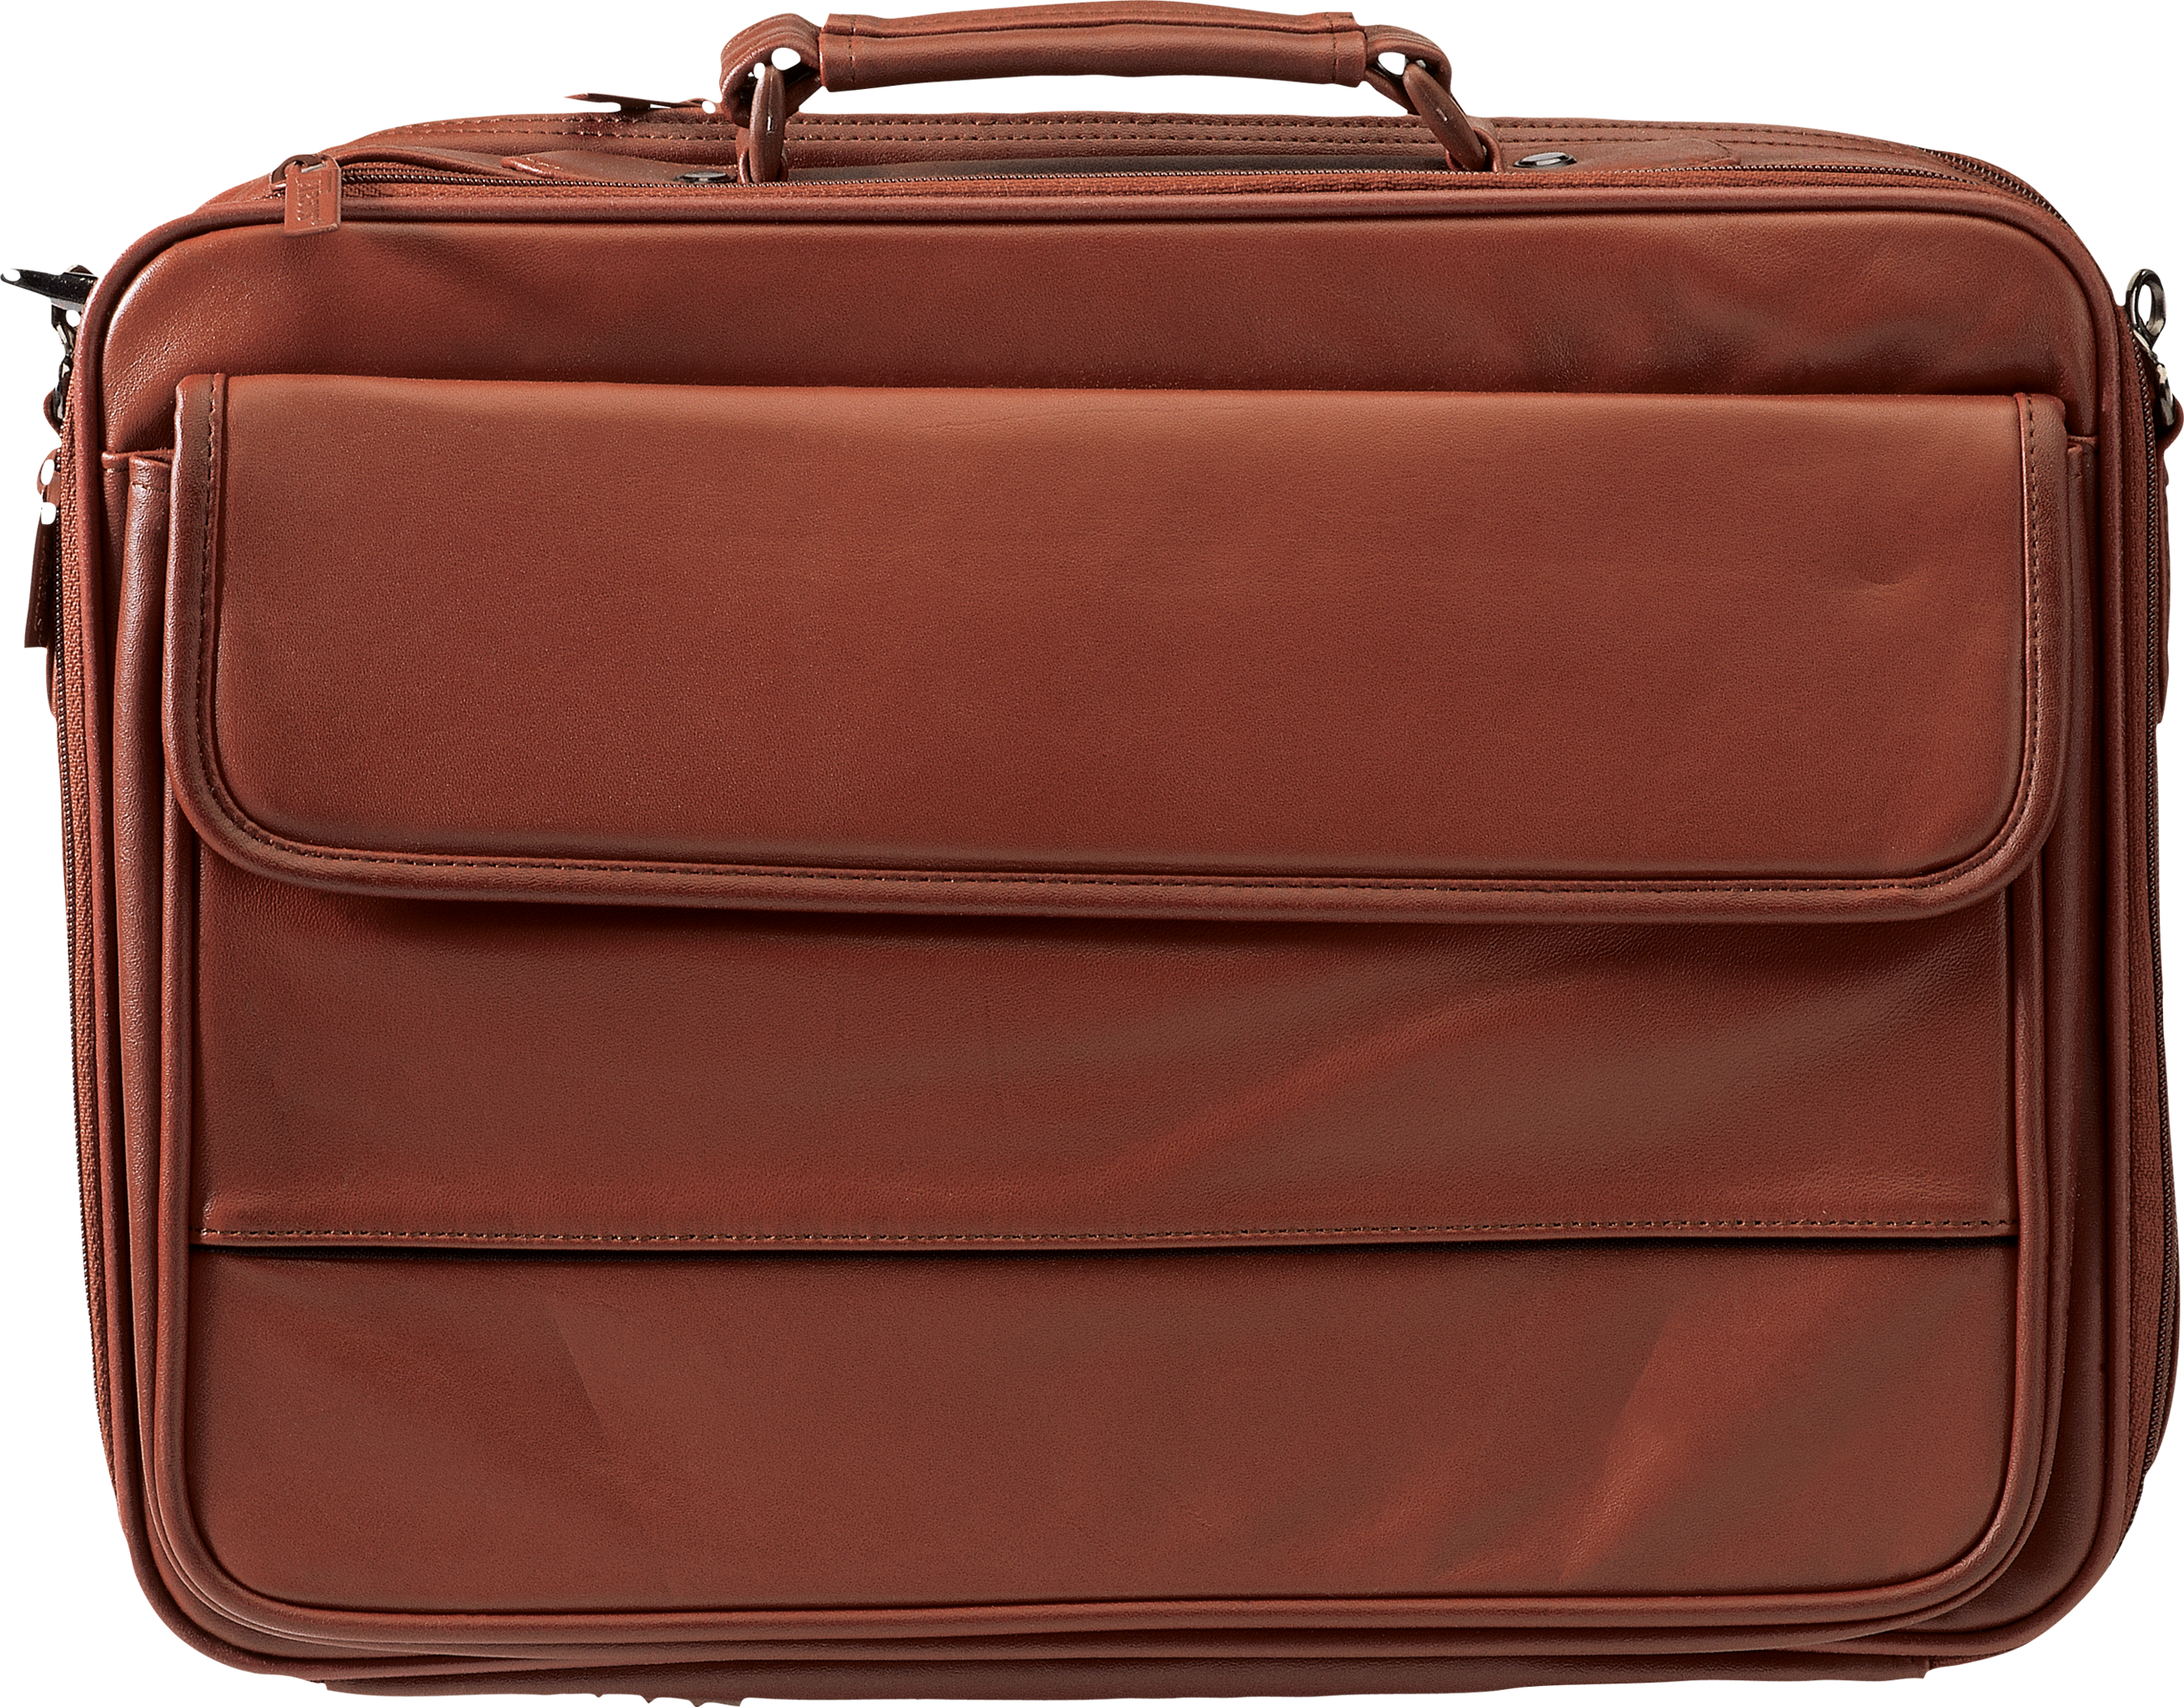 travel-suitcase.png (297×275